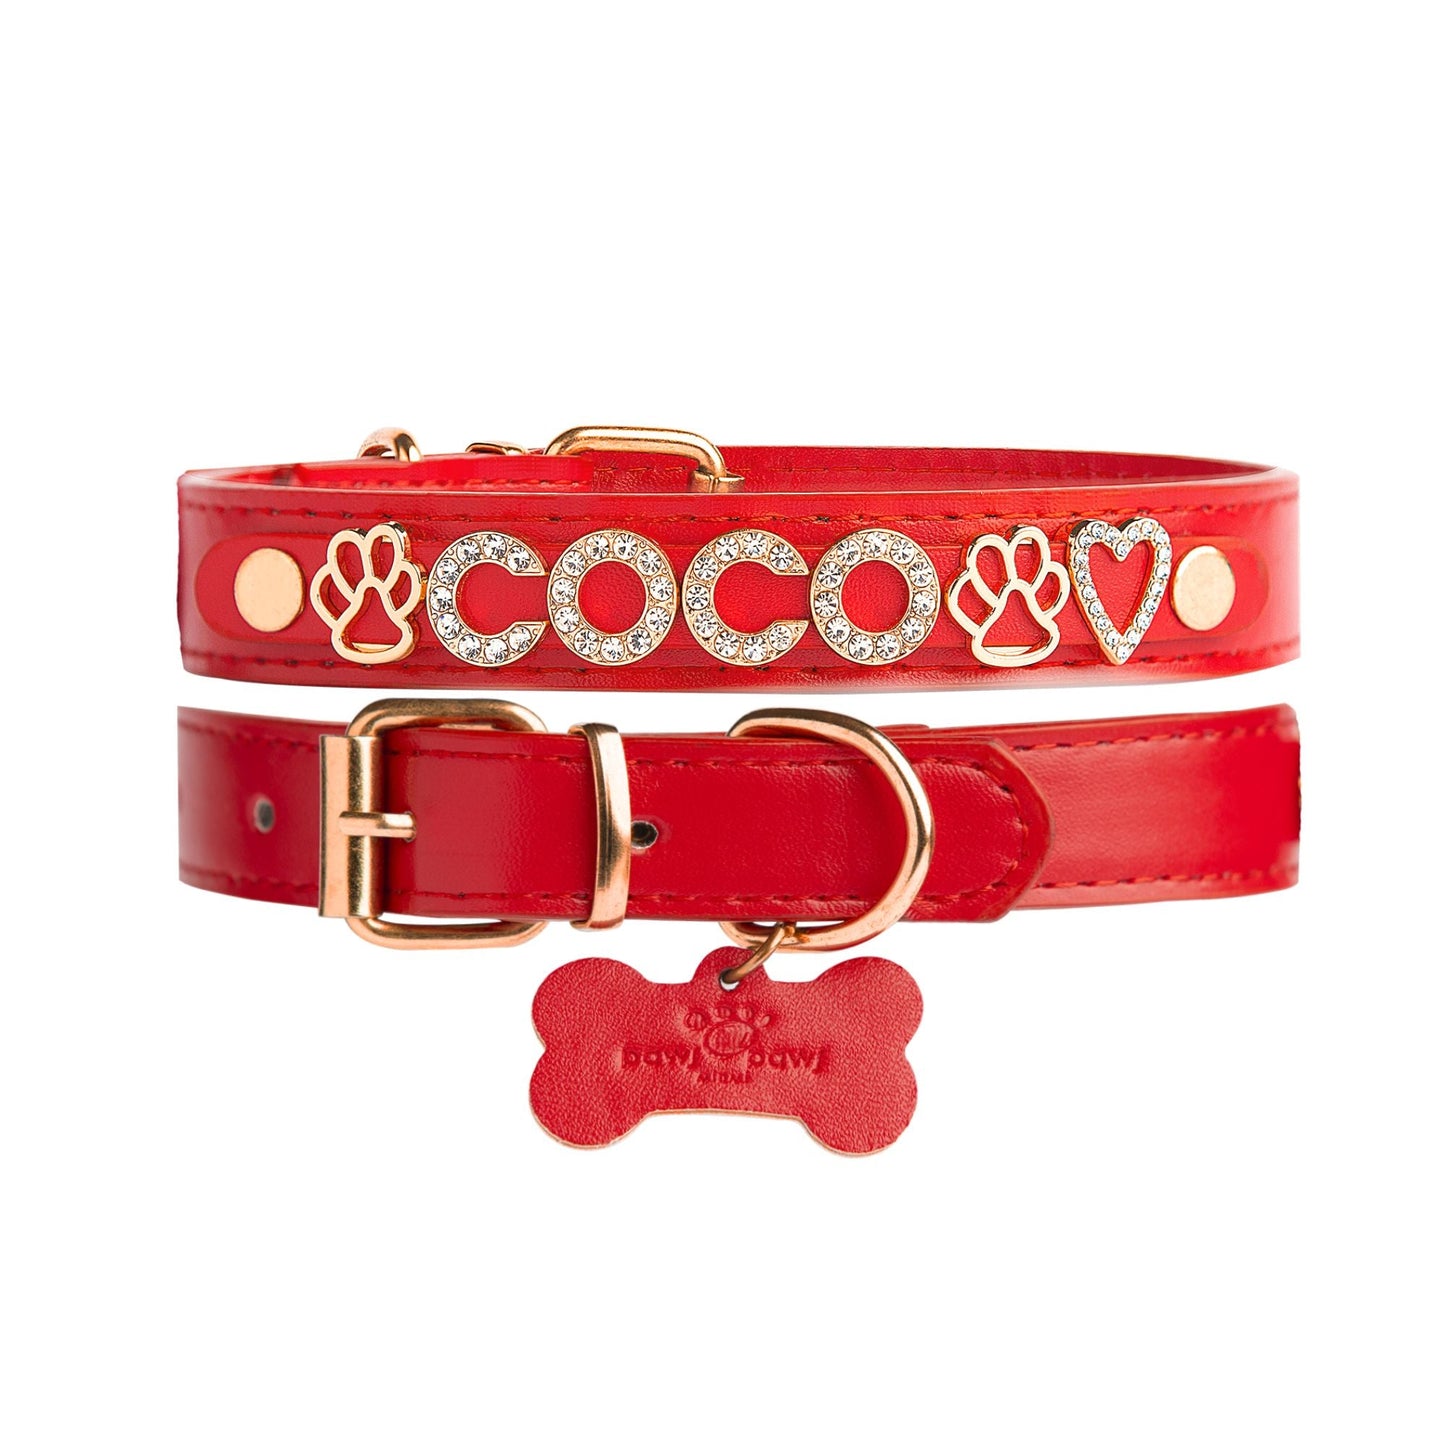 Custom Dog Collars With Studded Jewelry in Bundle